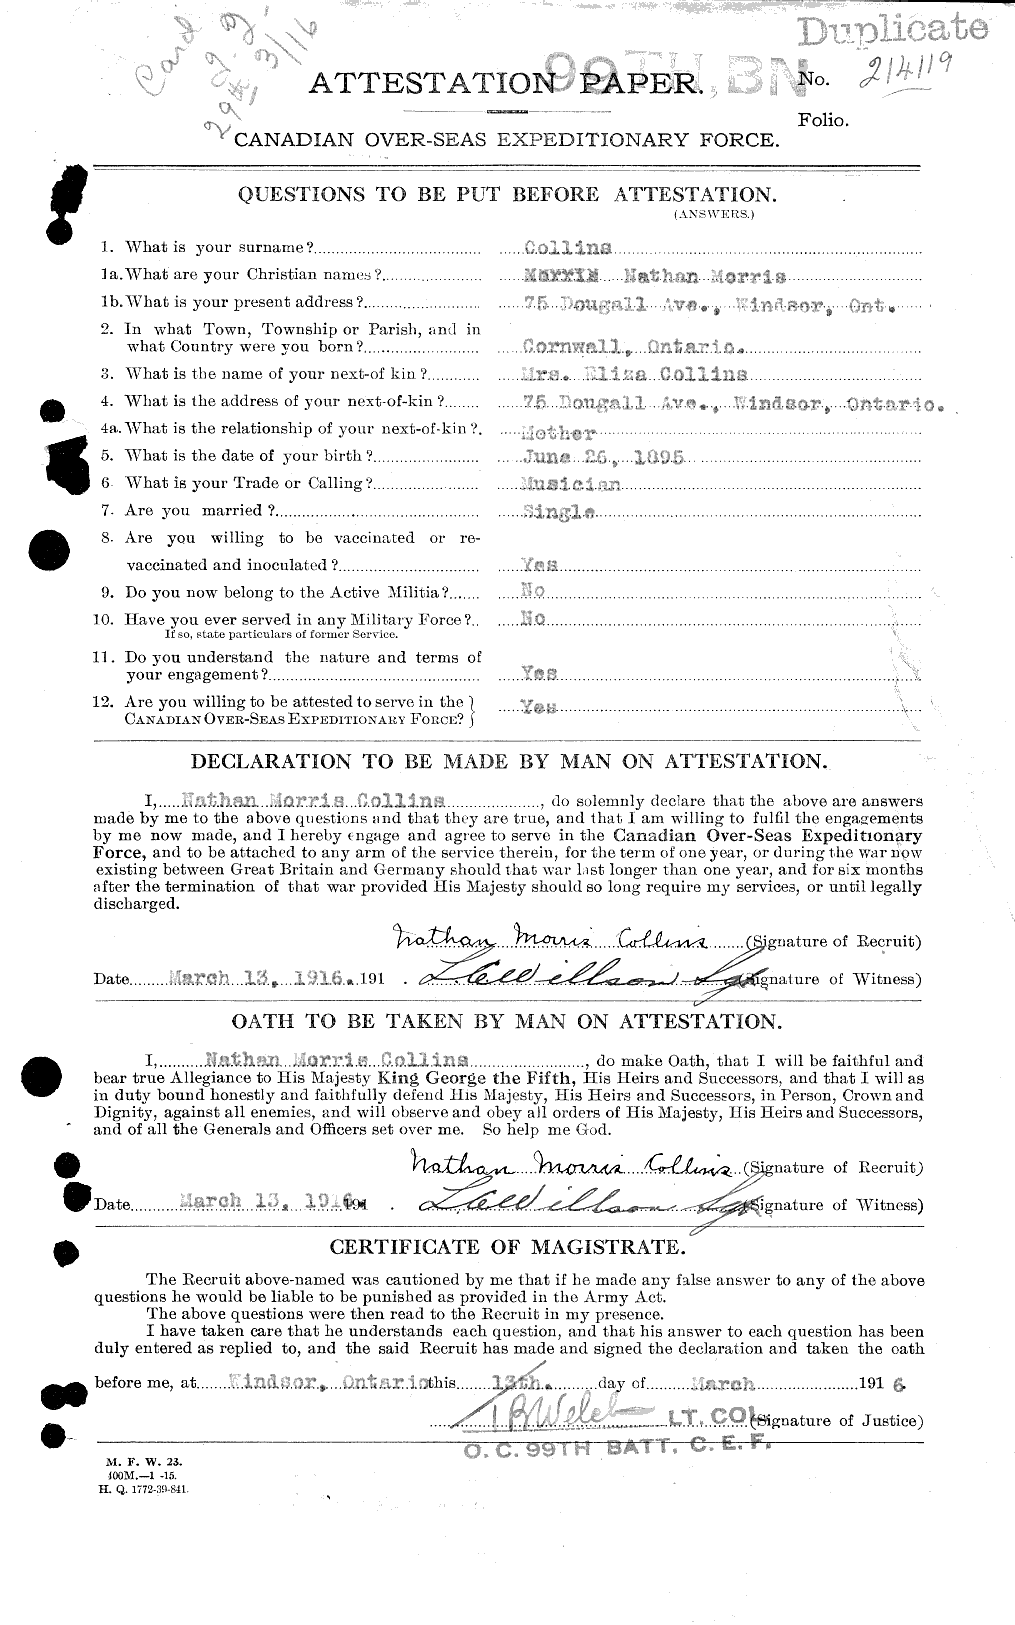 Personnel Records of the First World War - CEF 034475a